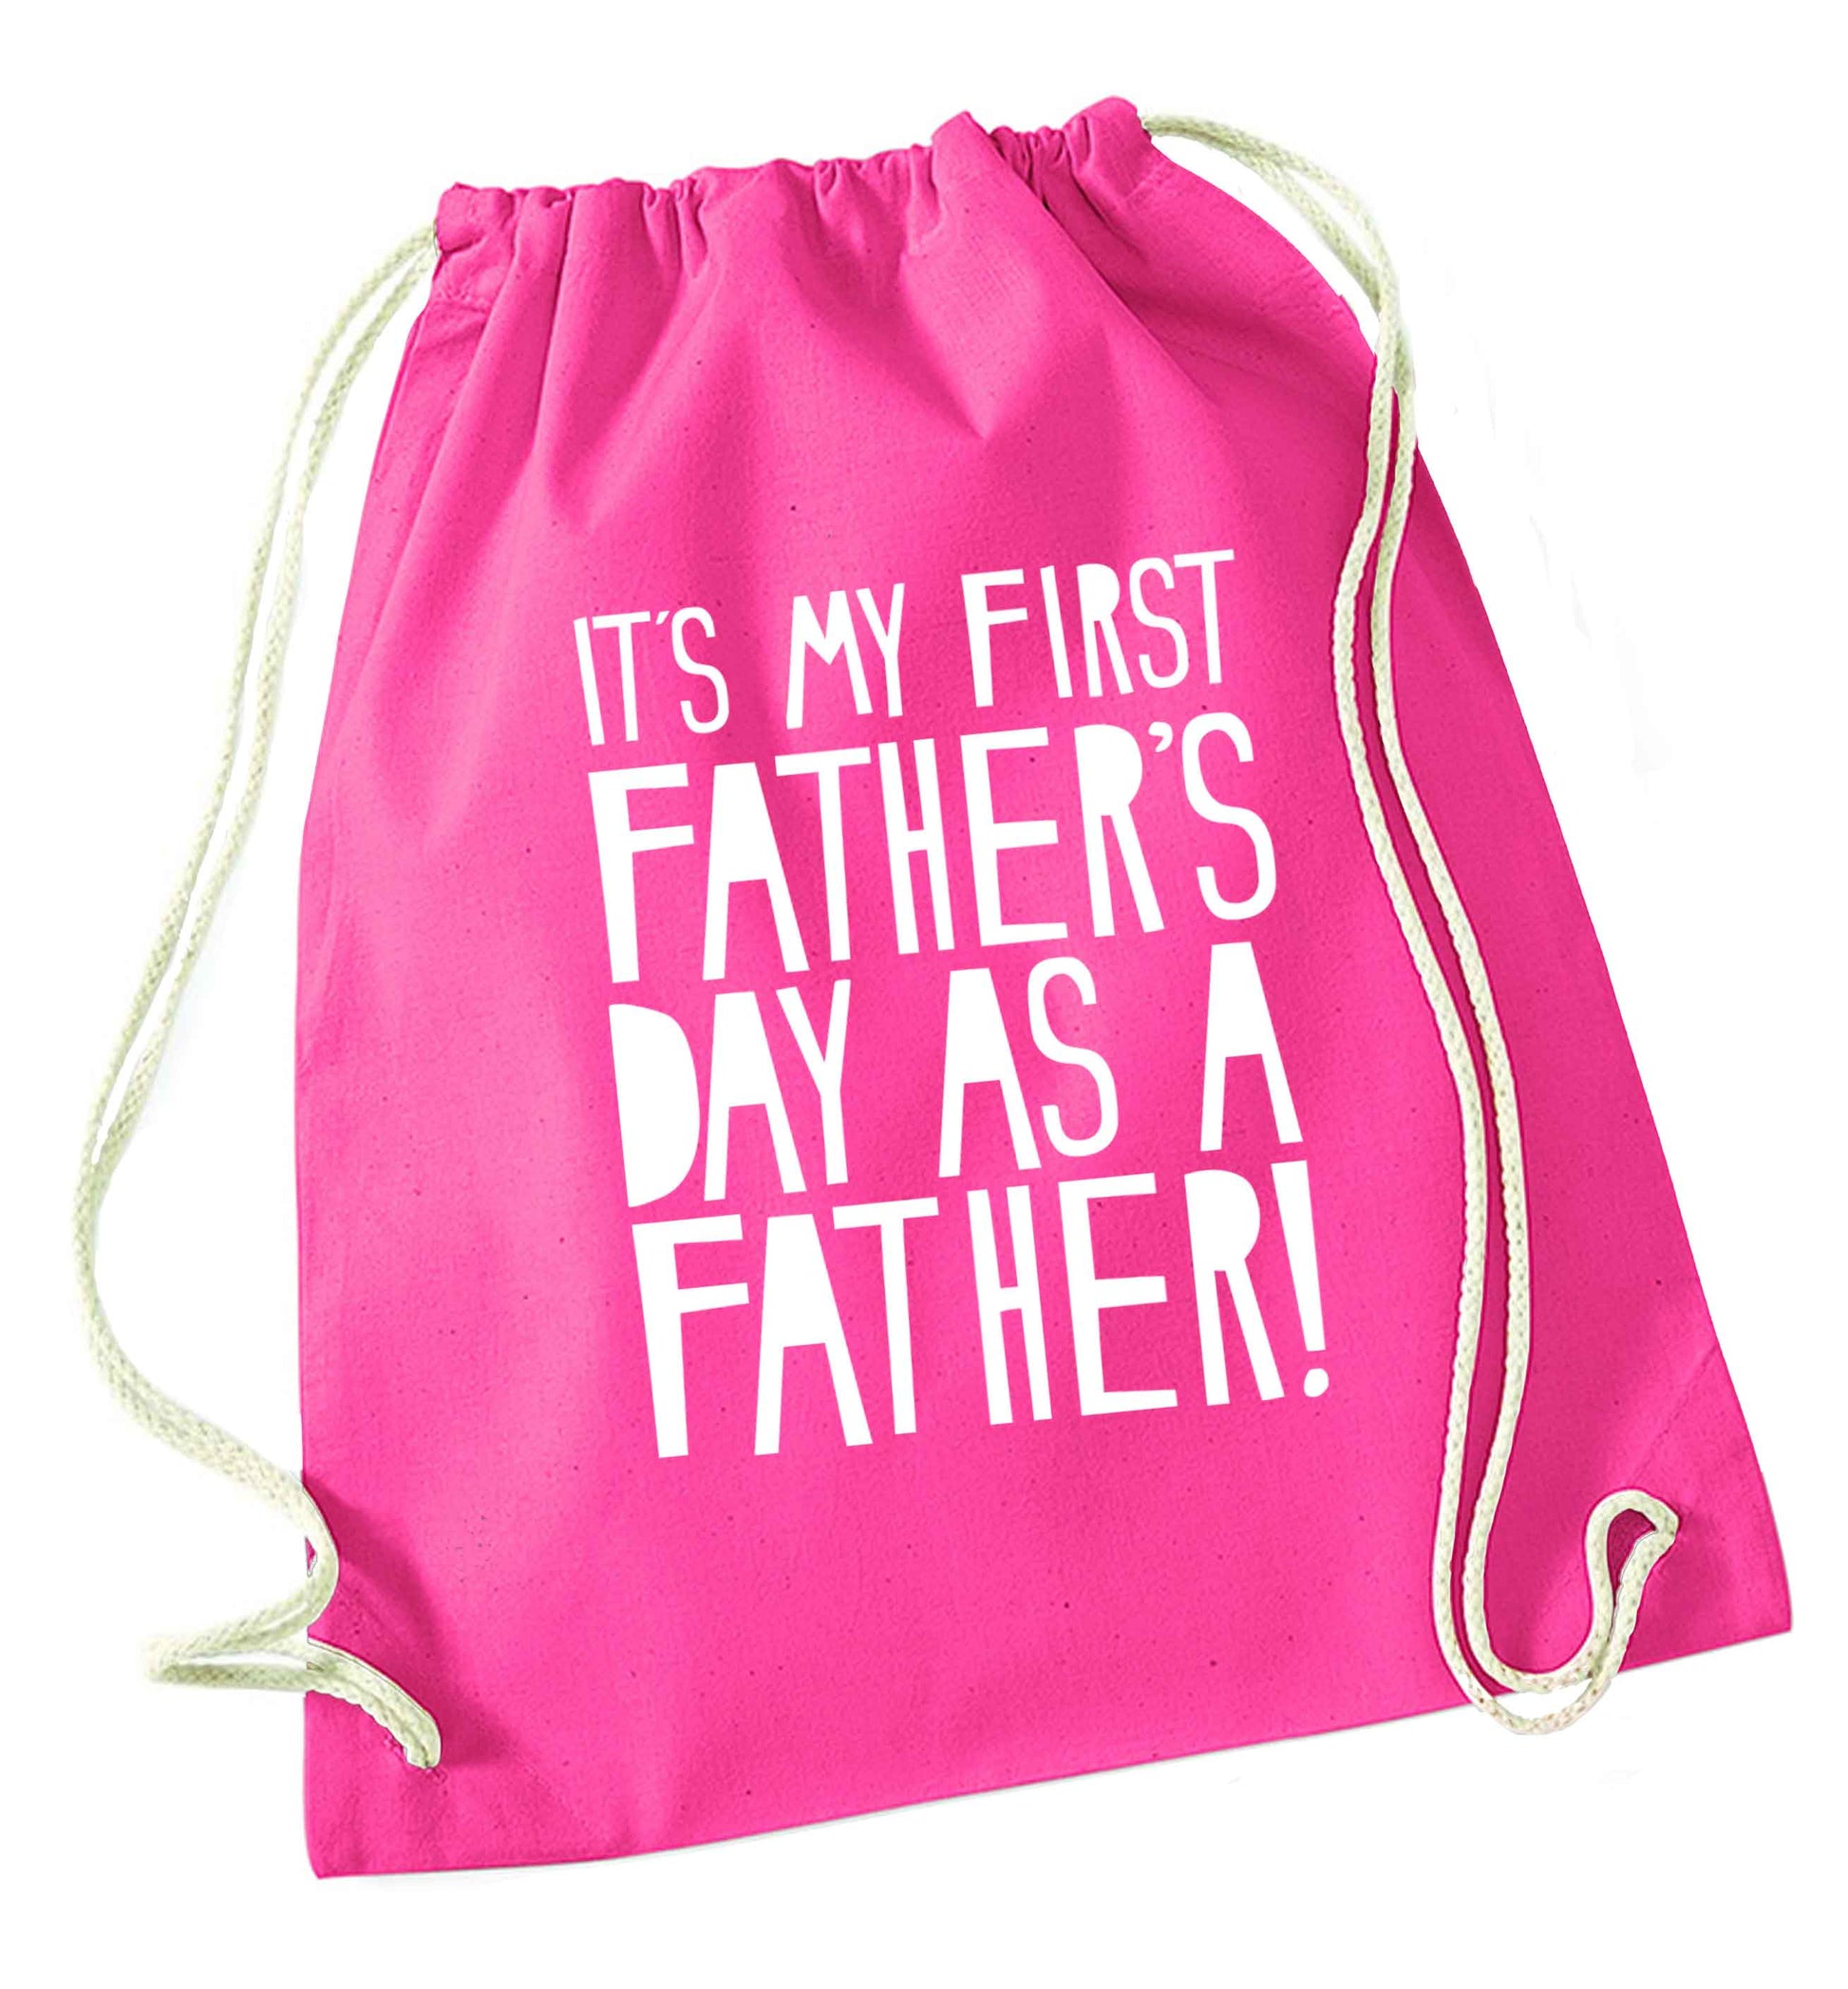 It's my first father's day as a father! pink drawstring bag